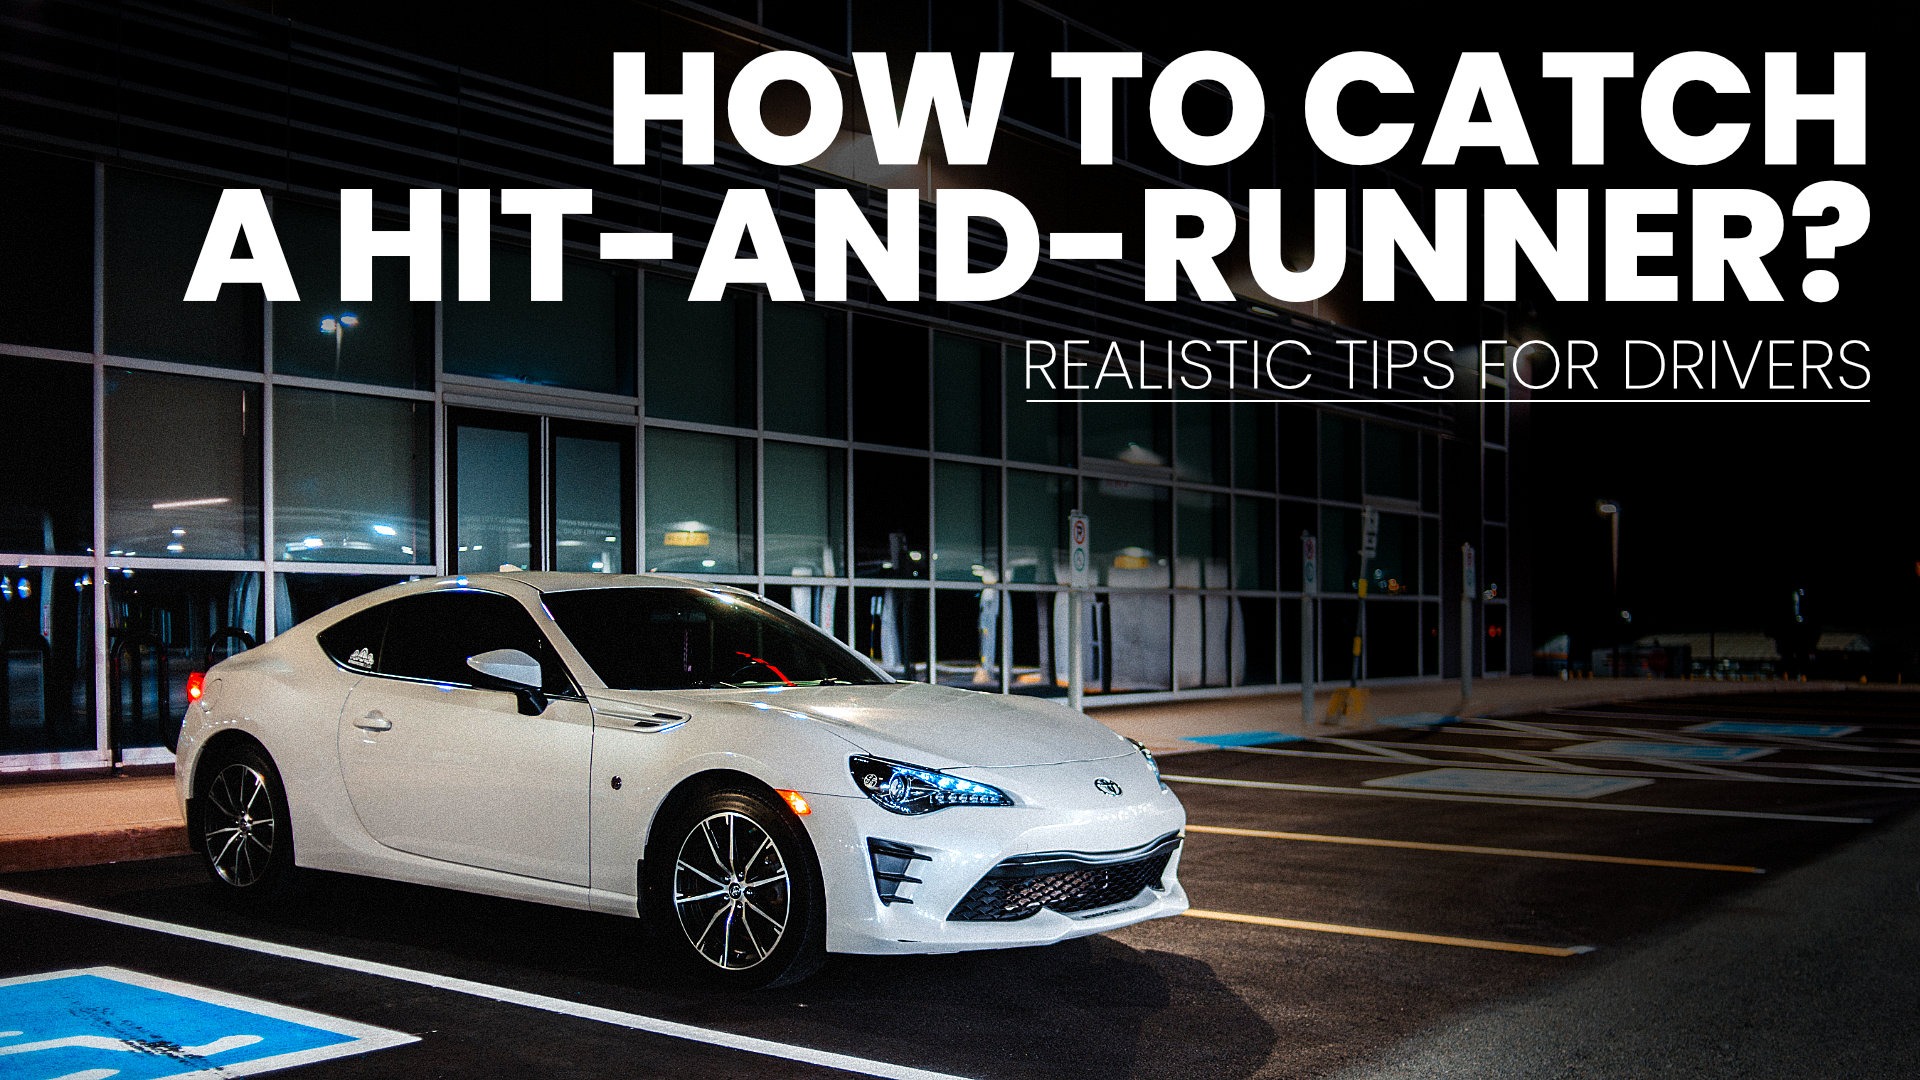 How to catch a hit-and-runner? Realistic tips for drivers